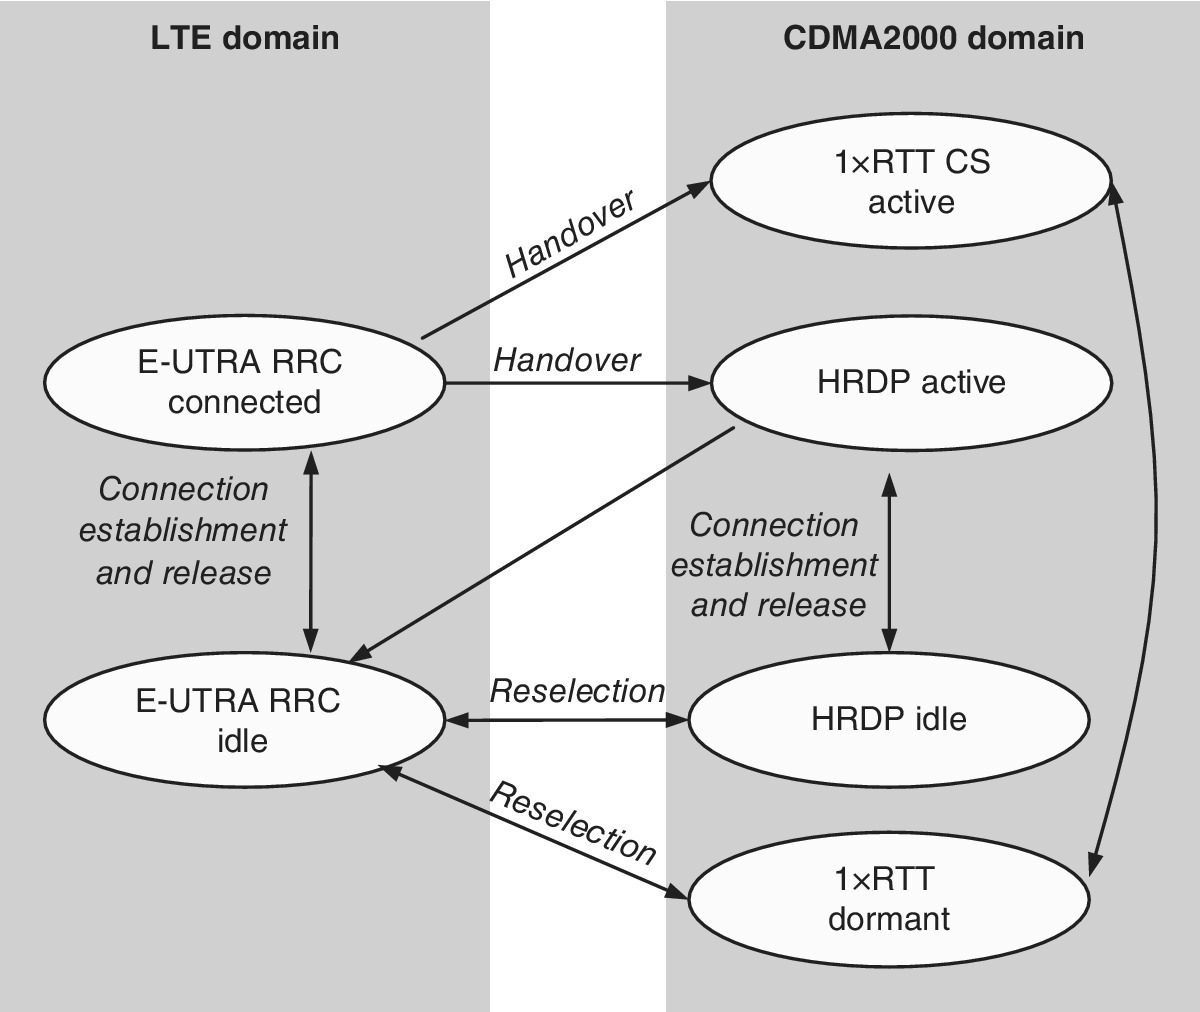 Schematic of mobility procedures between E‐UTRA and CDMA2000, displaying E-UTRA RRC connected and idle (left) linked to 1xRTT CS, HRDP active, HRDP idle, and 1xRTT dormant (right) by two-headed arrows.